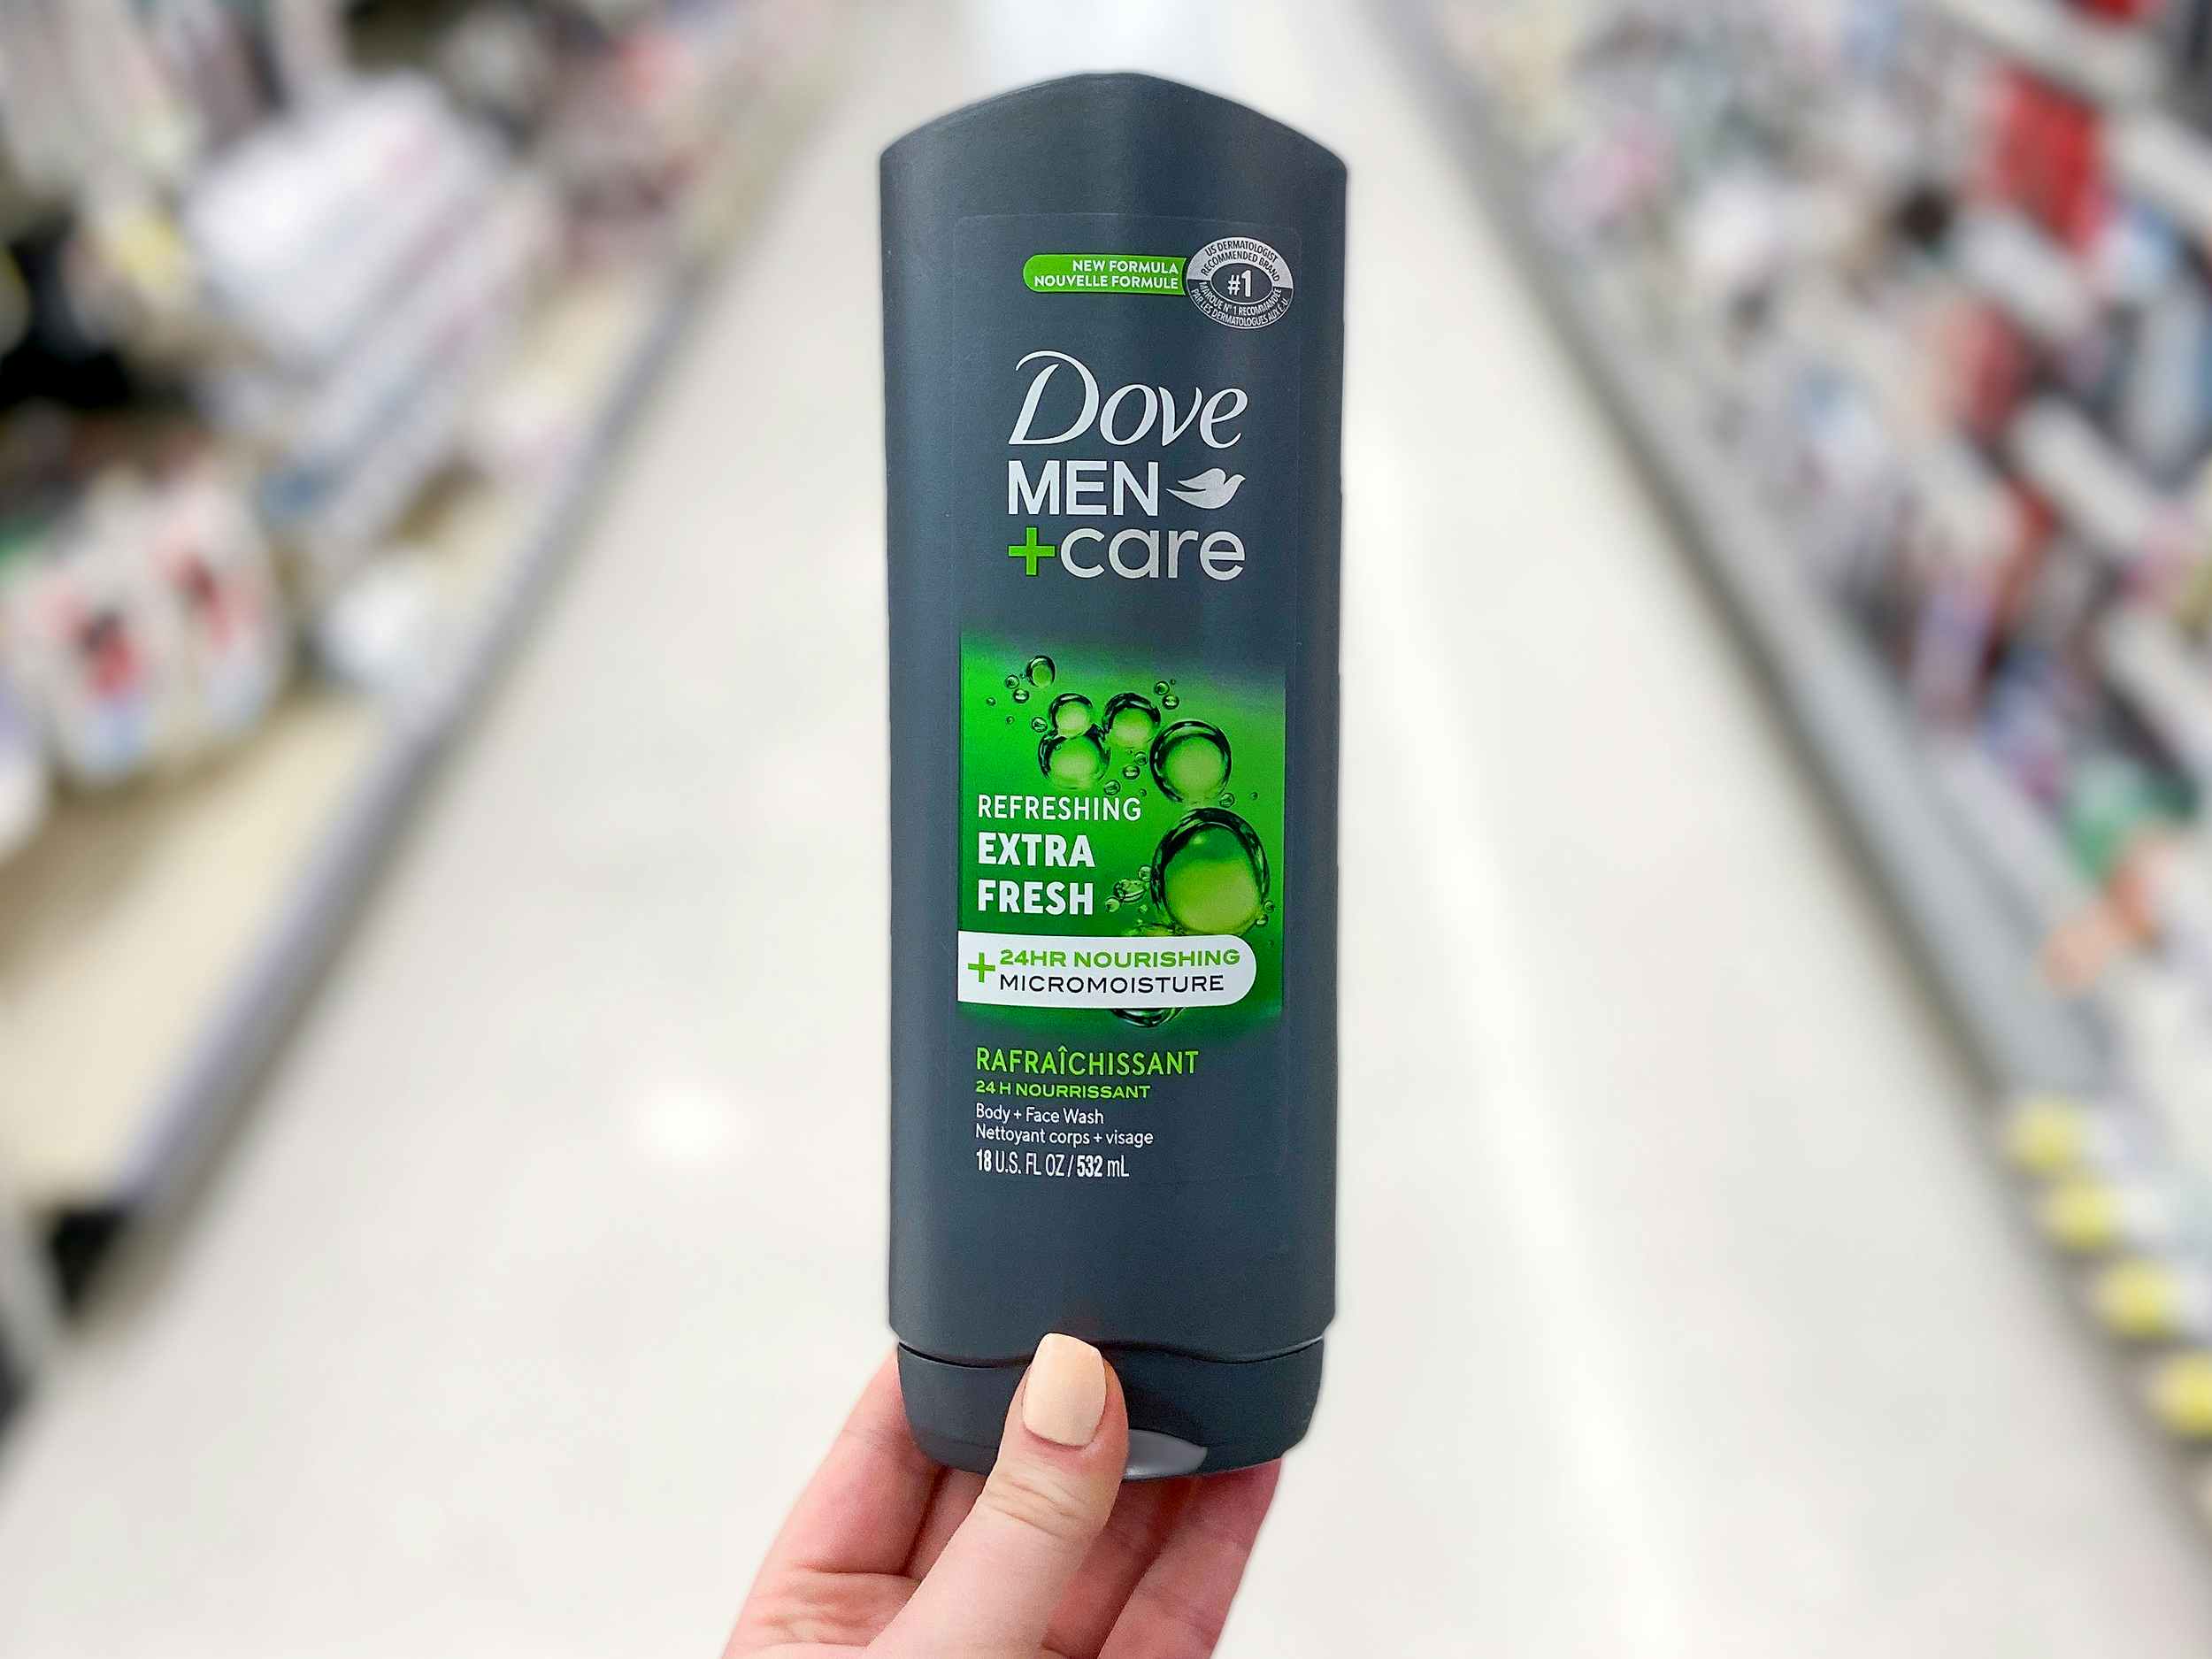 hand holding a bottle of dove men+care body wash